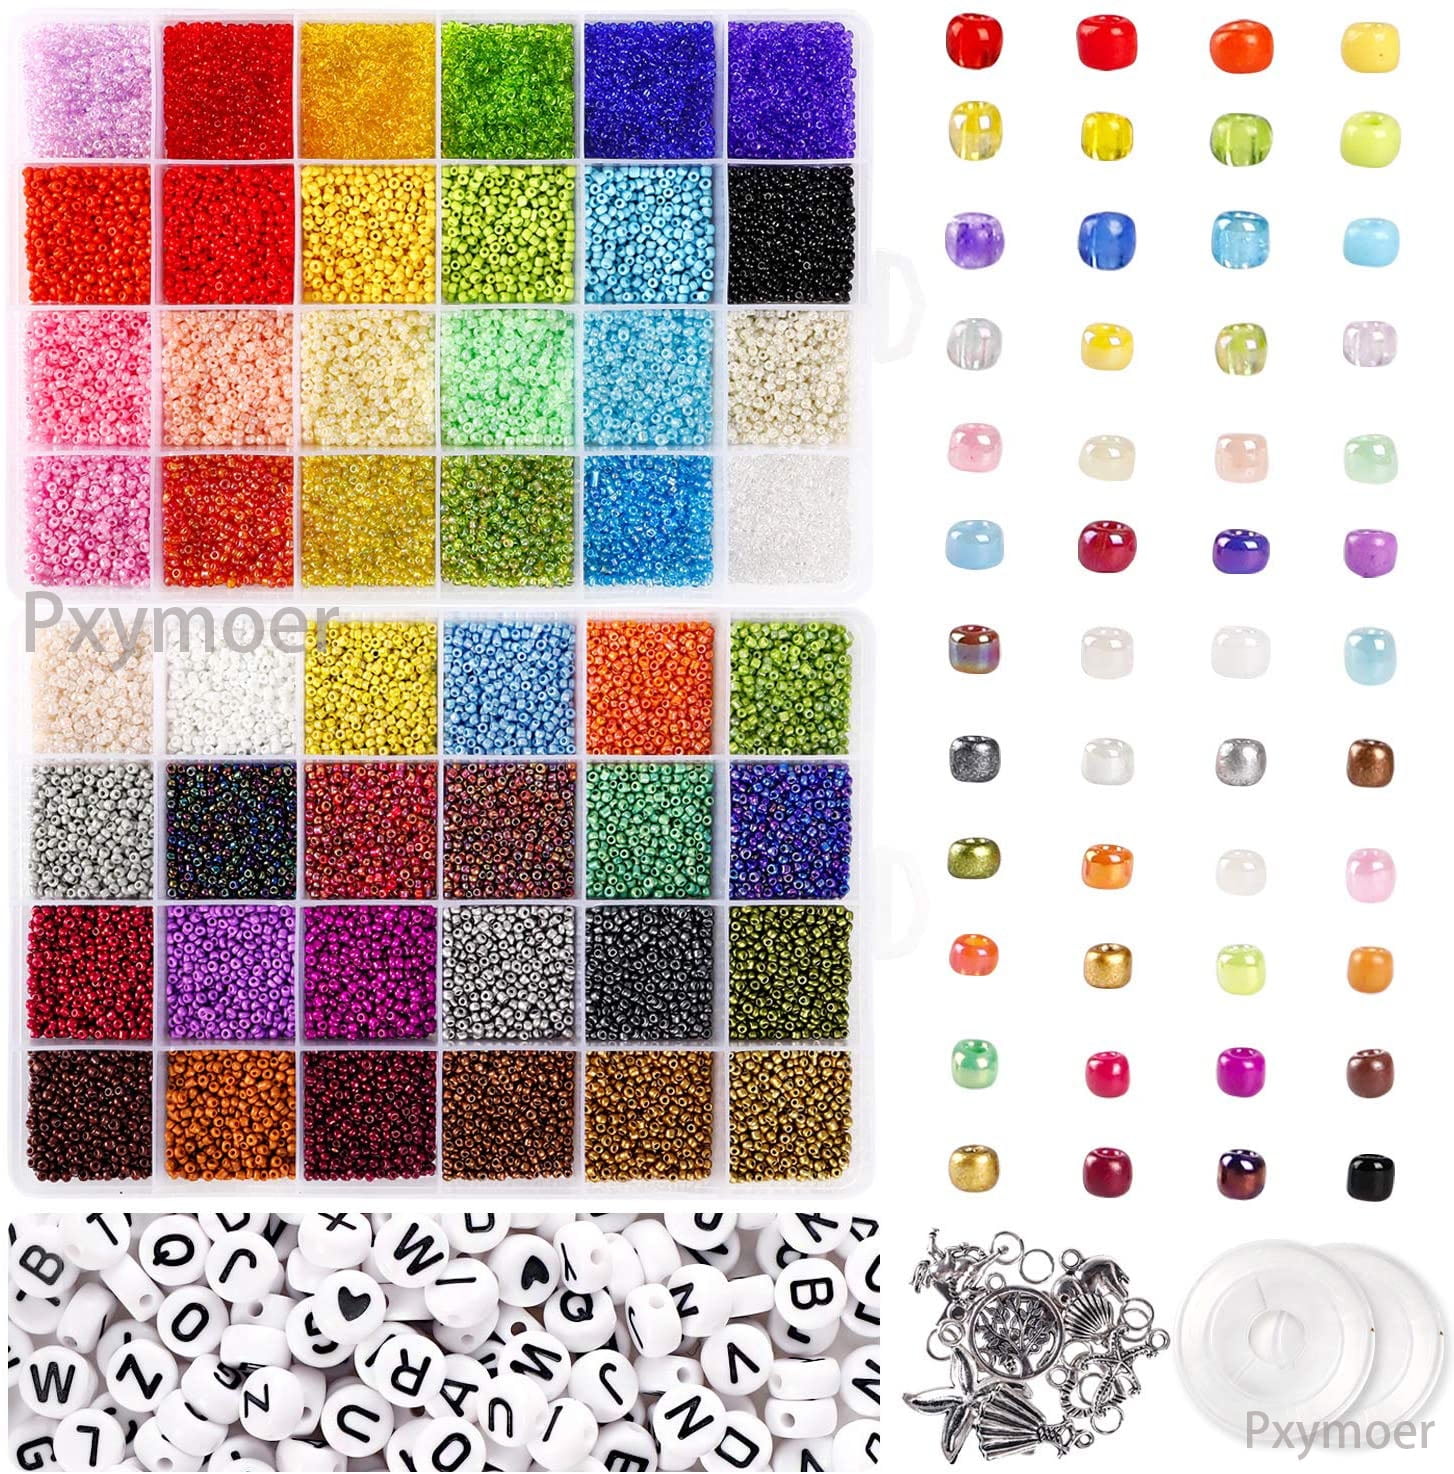 GREENTIME 49000pcs 2mm Seed Beads for Jewelry Making Kit, 92 Colors Small  Beads Kit Bracelet Beads with Pendant Charms Kit and Letter Beads for